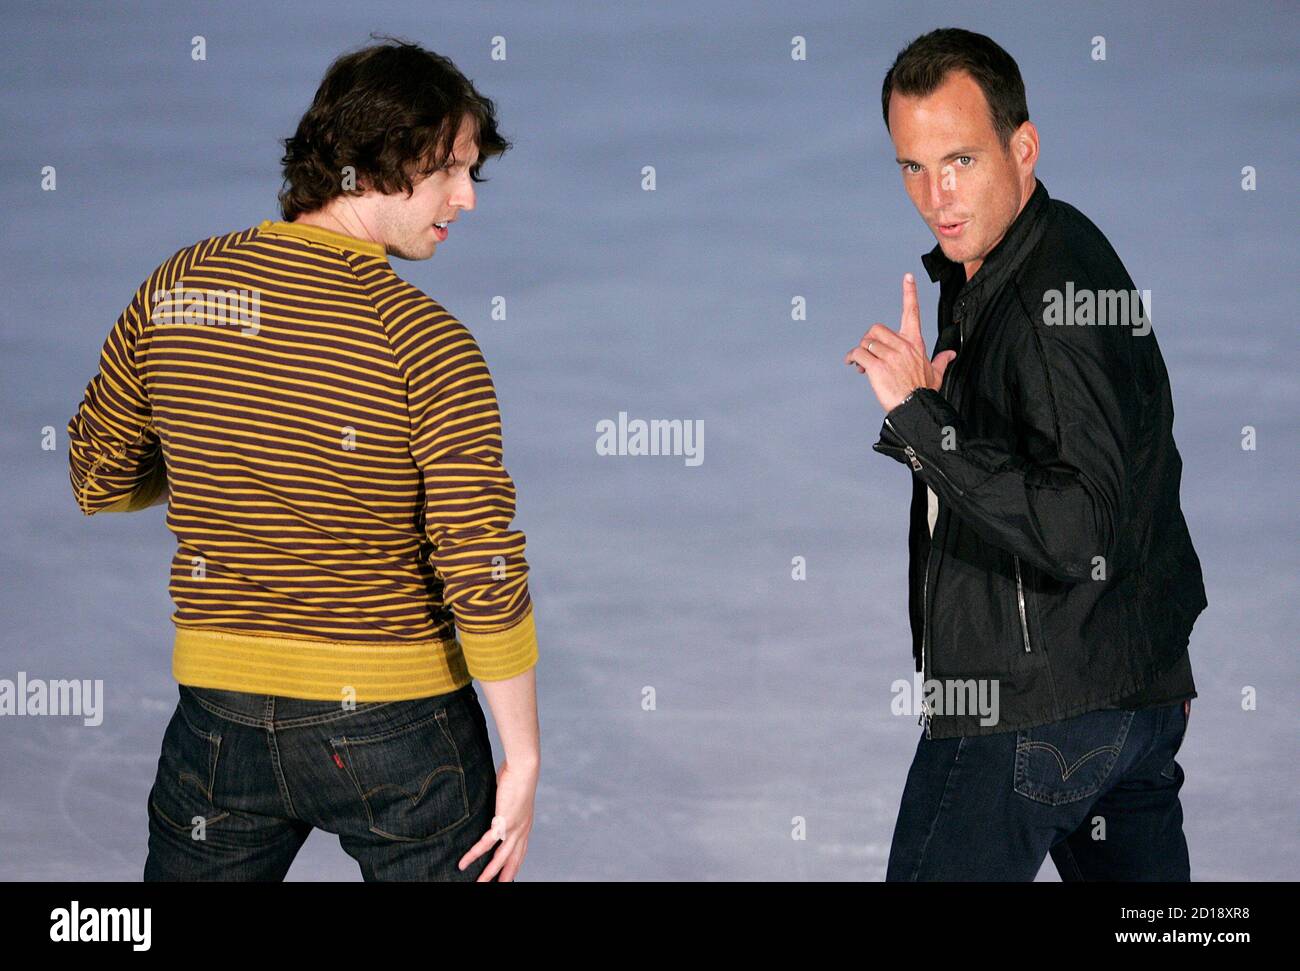 Actors Jon Heder (L) and Will Arnett pose for photographers during a media opportunity at an ice skating rink to promote their film "Blades of Glory" in Sydney June 6, 2007.         REUTERS/Tim Wimborne     (AUSTRALIA) Stock Photo